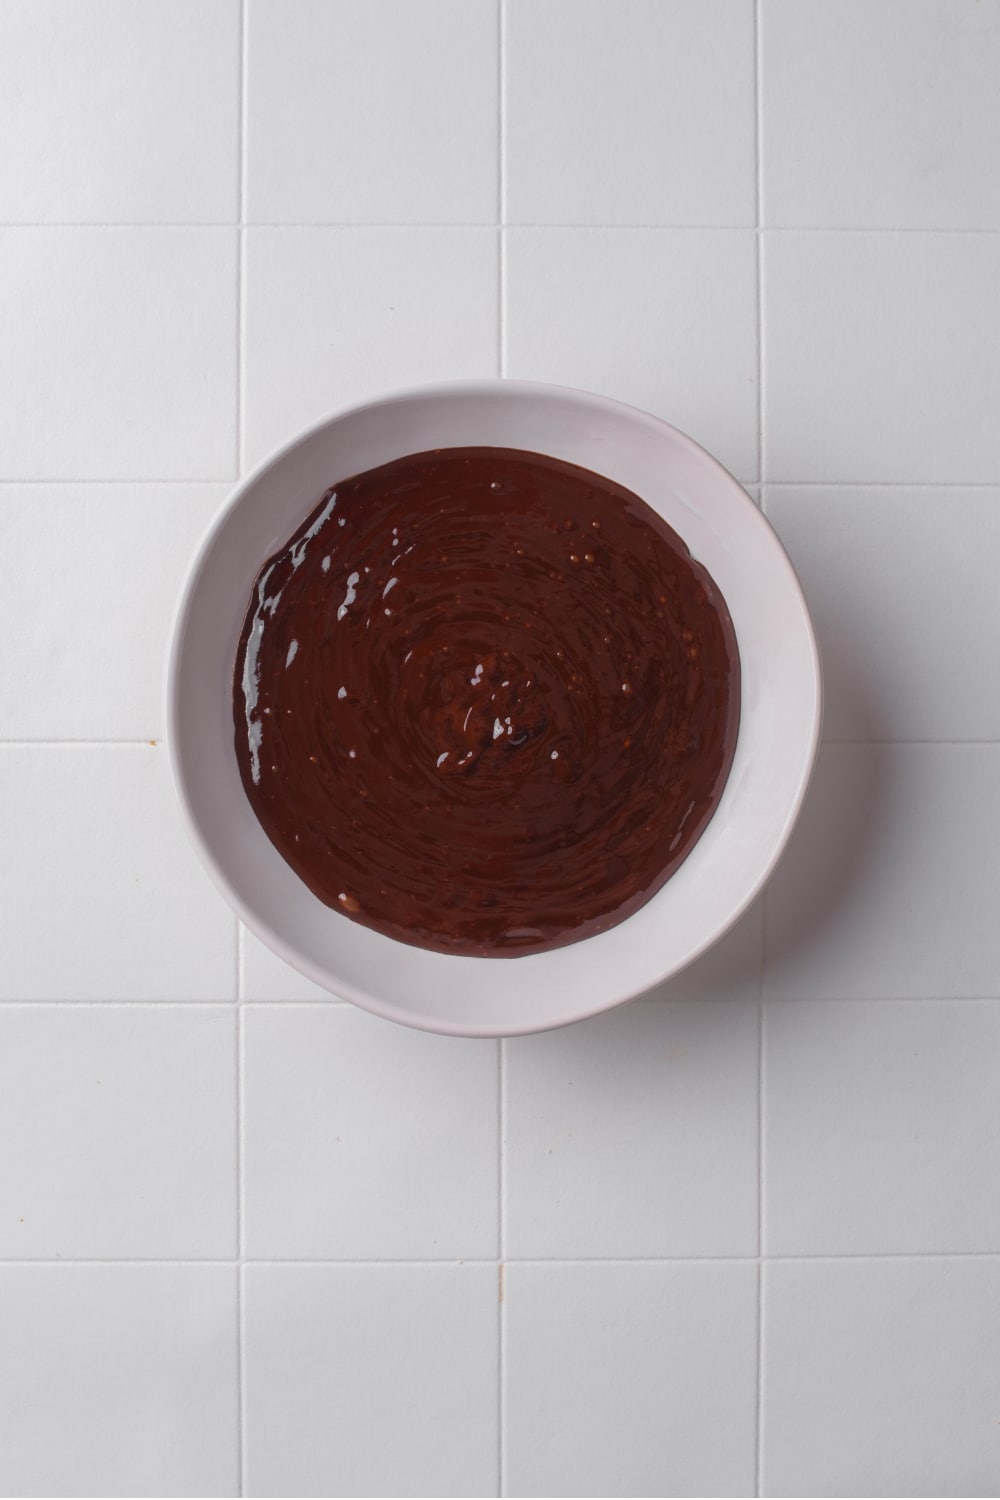 A white bowl with melted chocolate on a tiled counter.